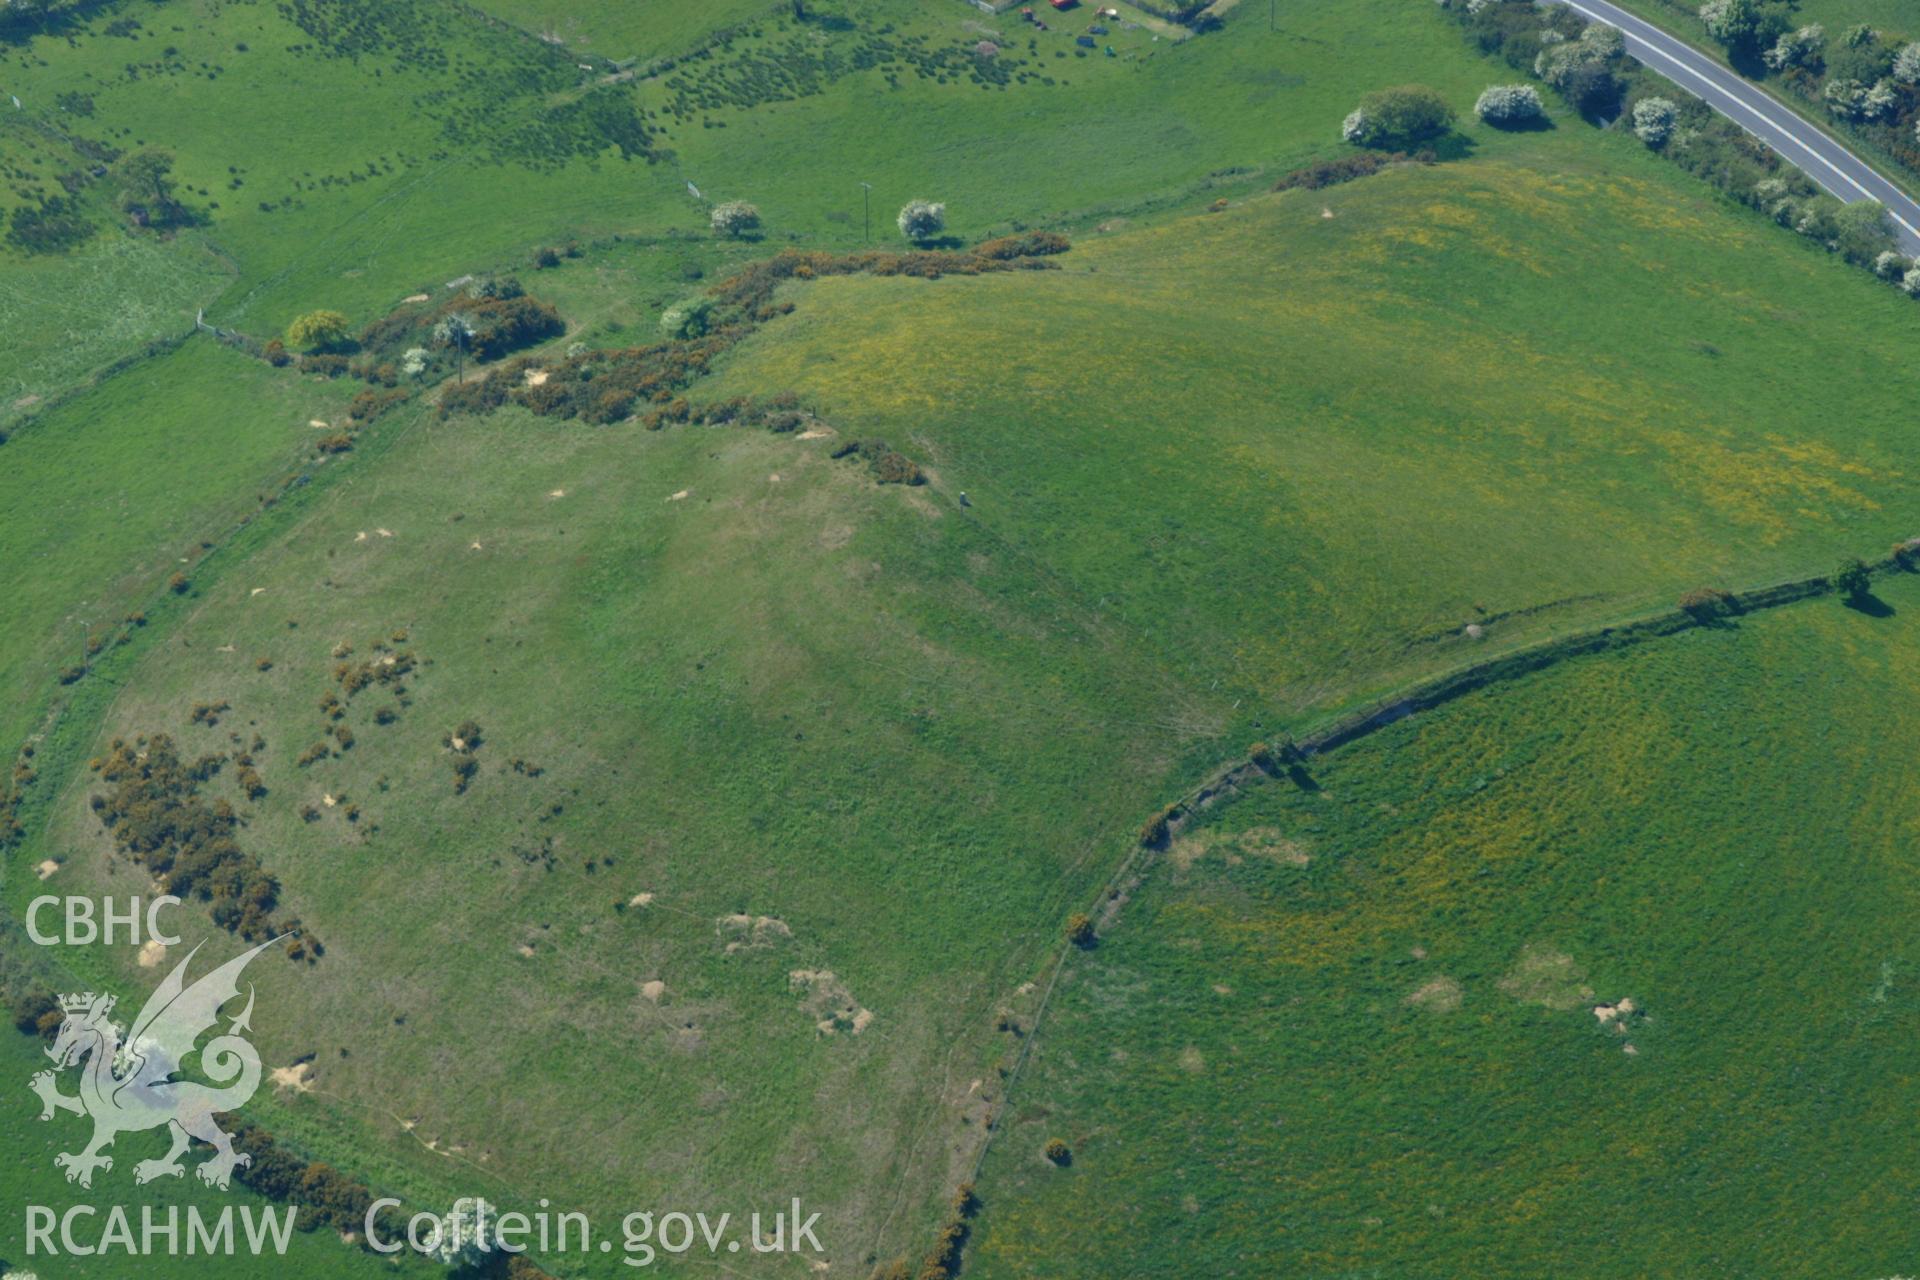 RCAHMW colour oblique aerial photograph of Banc-Warren taken on 24/05/2004 by Toby Driver